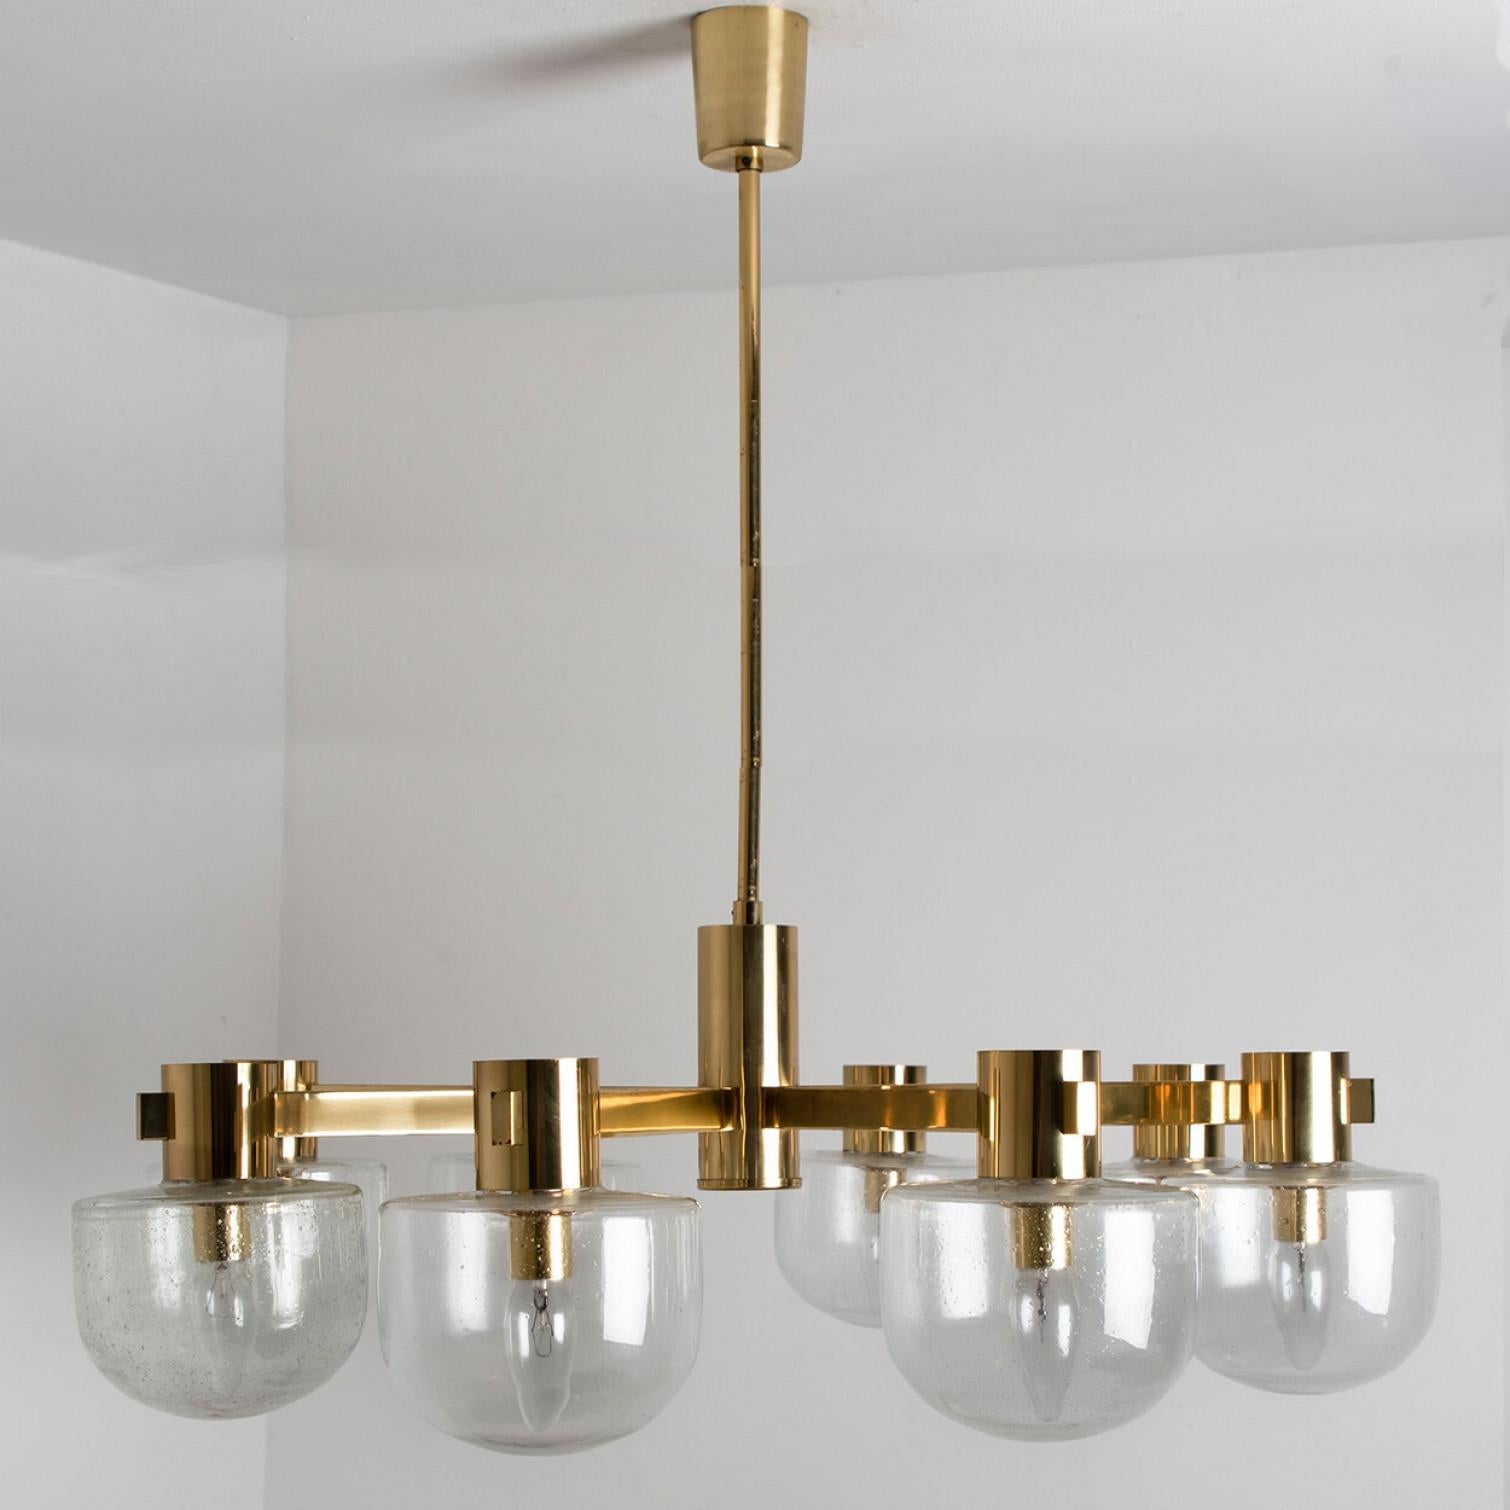 Beautiful chandelier by Hillebrand. Manufactured in Germany, circa 1960.
With beautiful glass shades and gold details on a gold mounting hardware. The chandelier shows 8 arms, each with an clear white glass shade. This chandelier illuminates